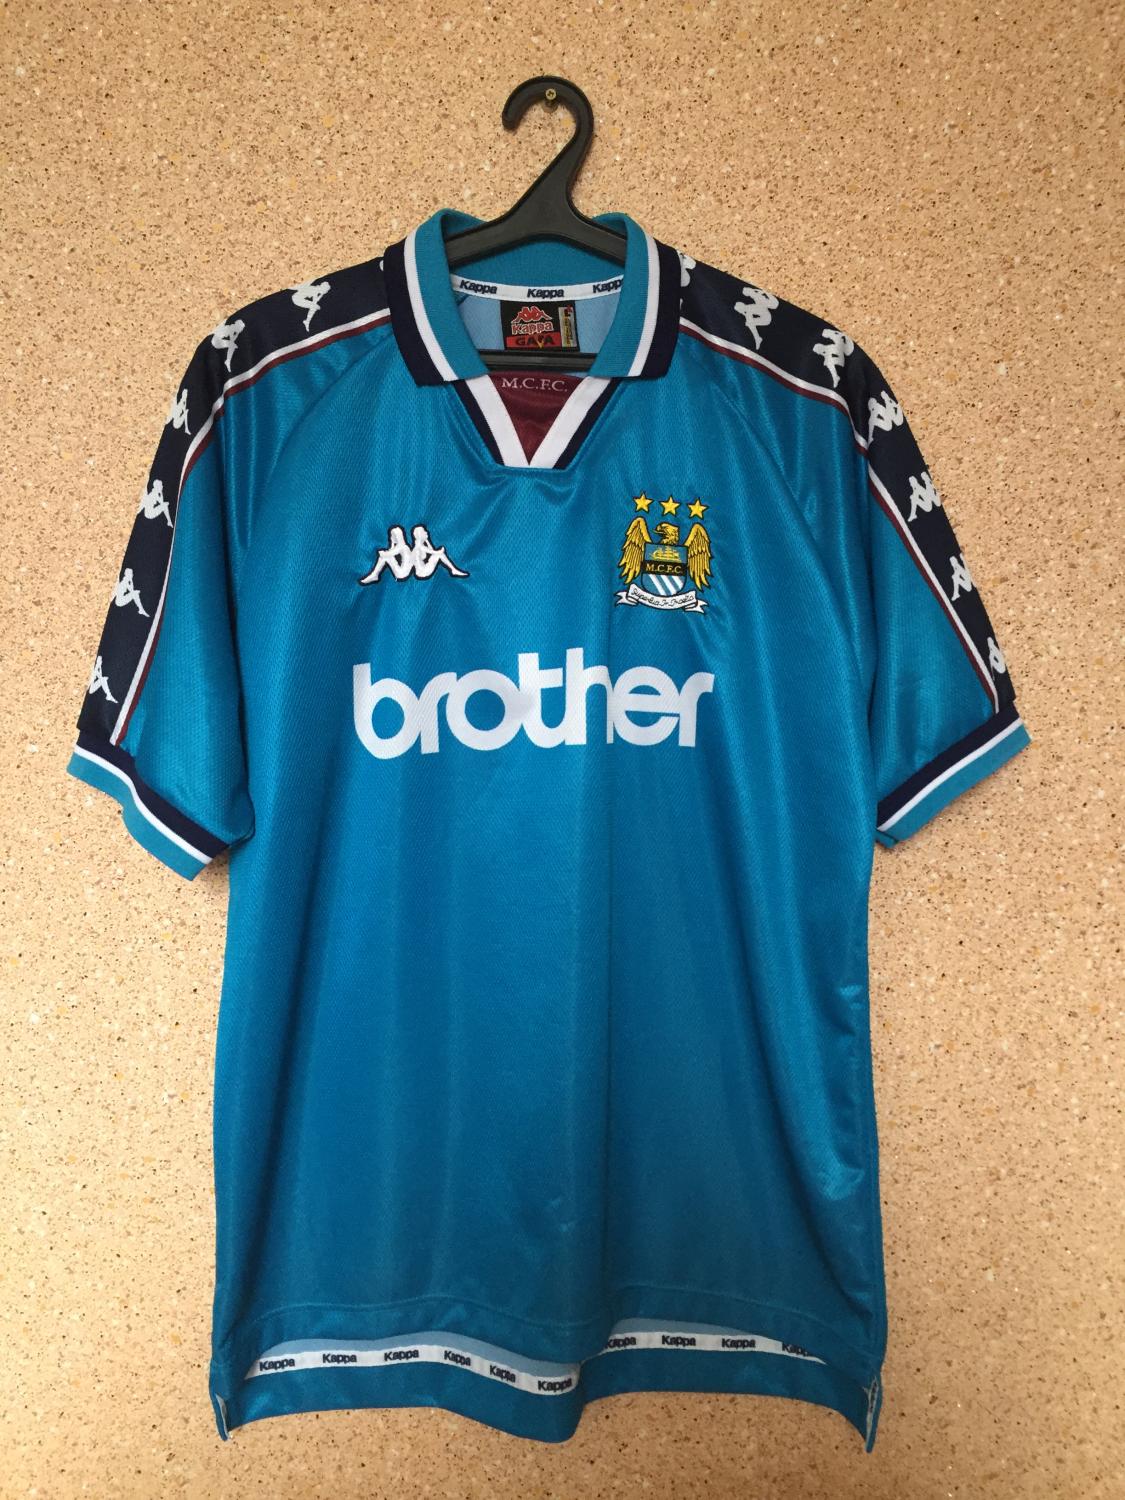 Manchester City Home football shirt 1997 - 1999. Sponsored by Brother